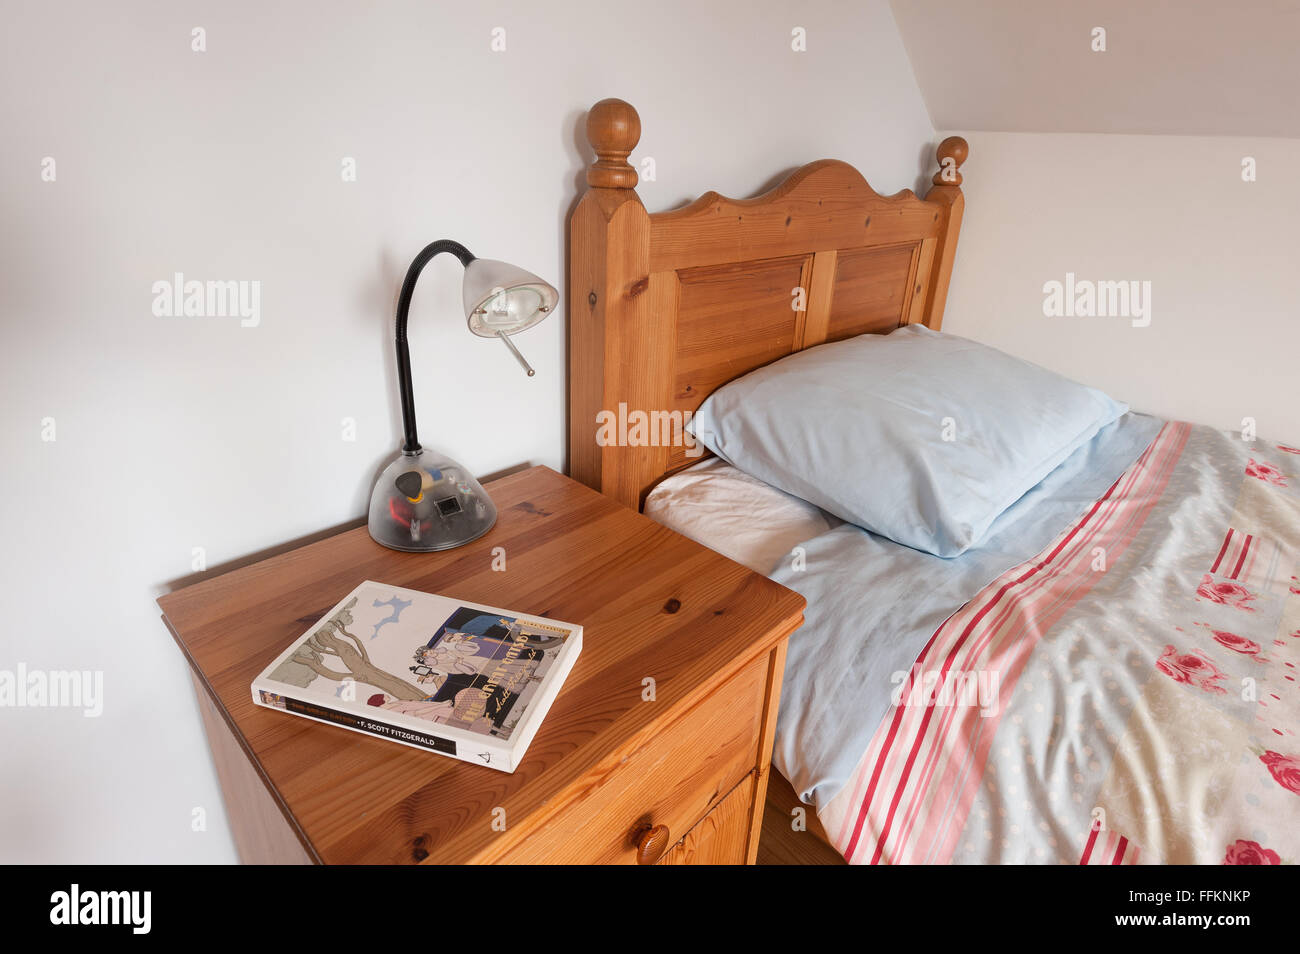 neat wooden pine bed and duvet with cabinet and lamp ready for a good bedside read of a novel Stock Photo